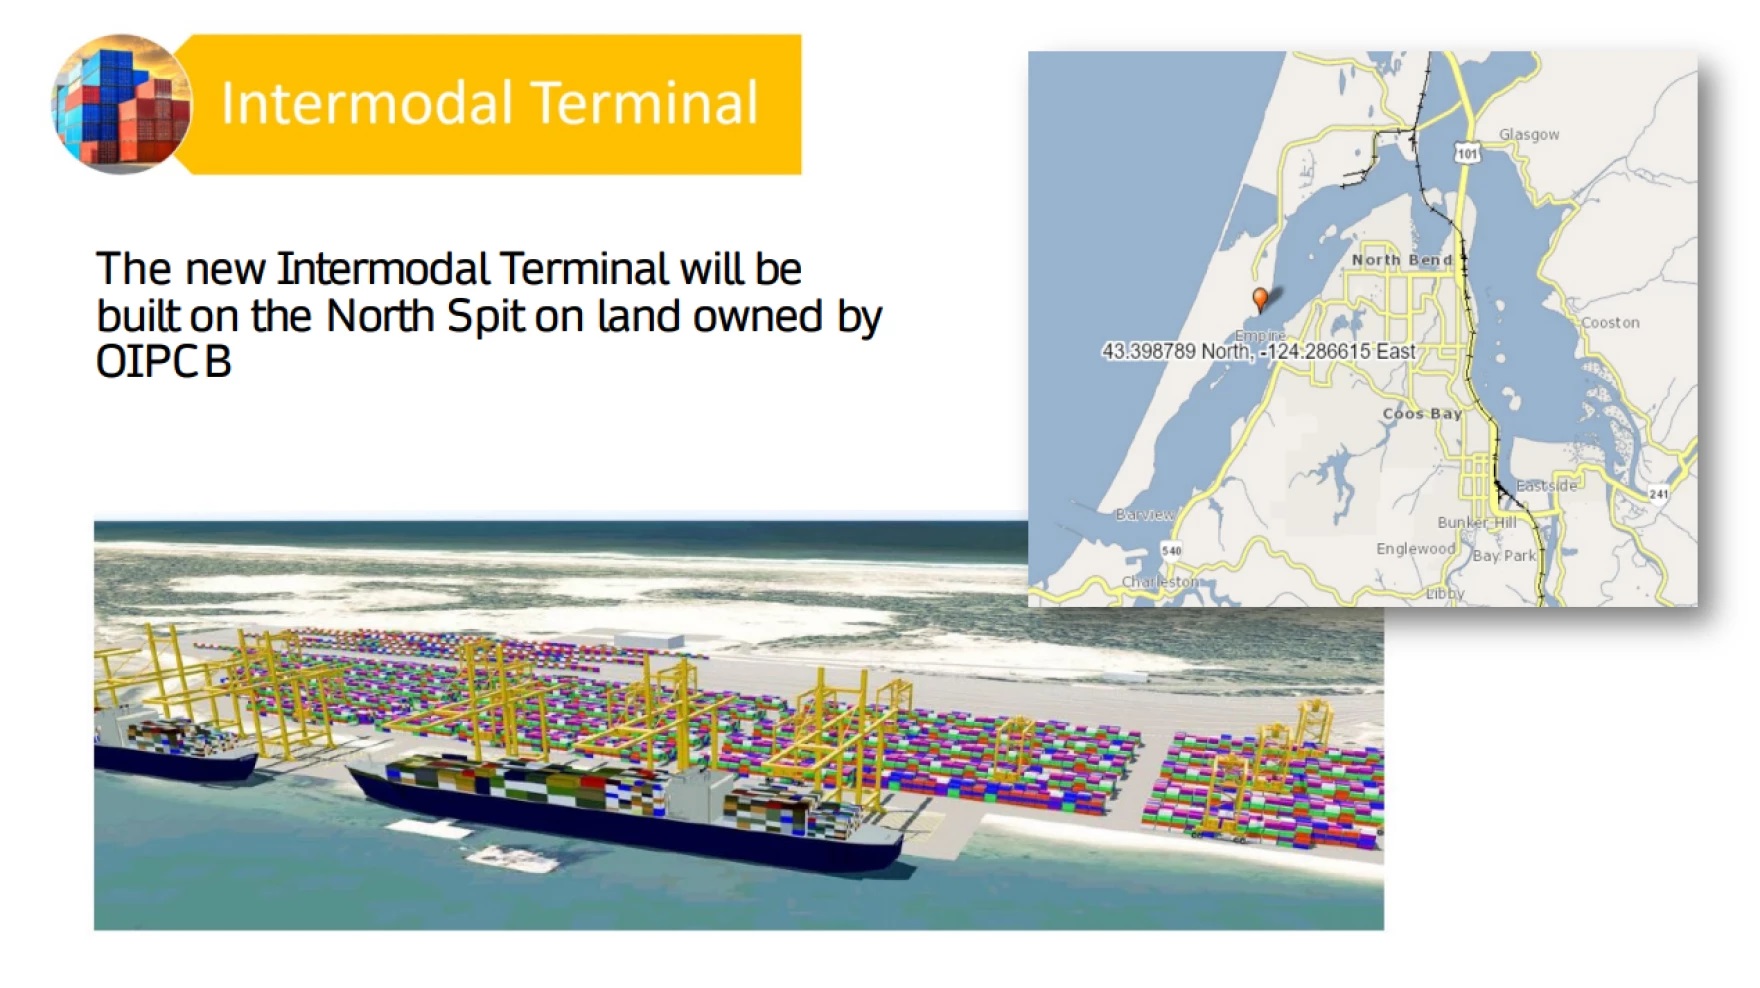 A map of Coos Bay pinpoints the location of the port. A computer graphic shows cargo ships docked next to containers. Text reads "Intermodal Terminal: The new intermodal terminal will be built on the North Spit on land owned by OIPCB"